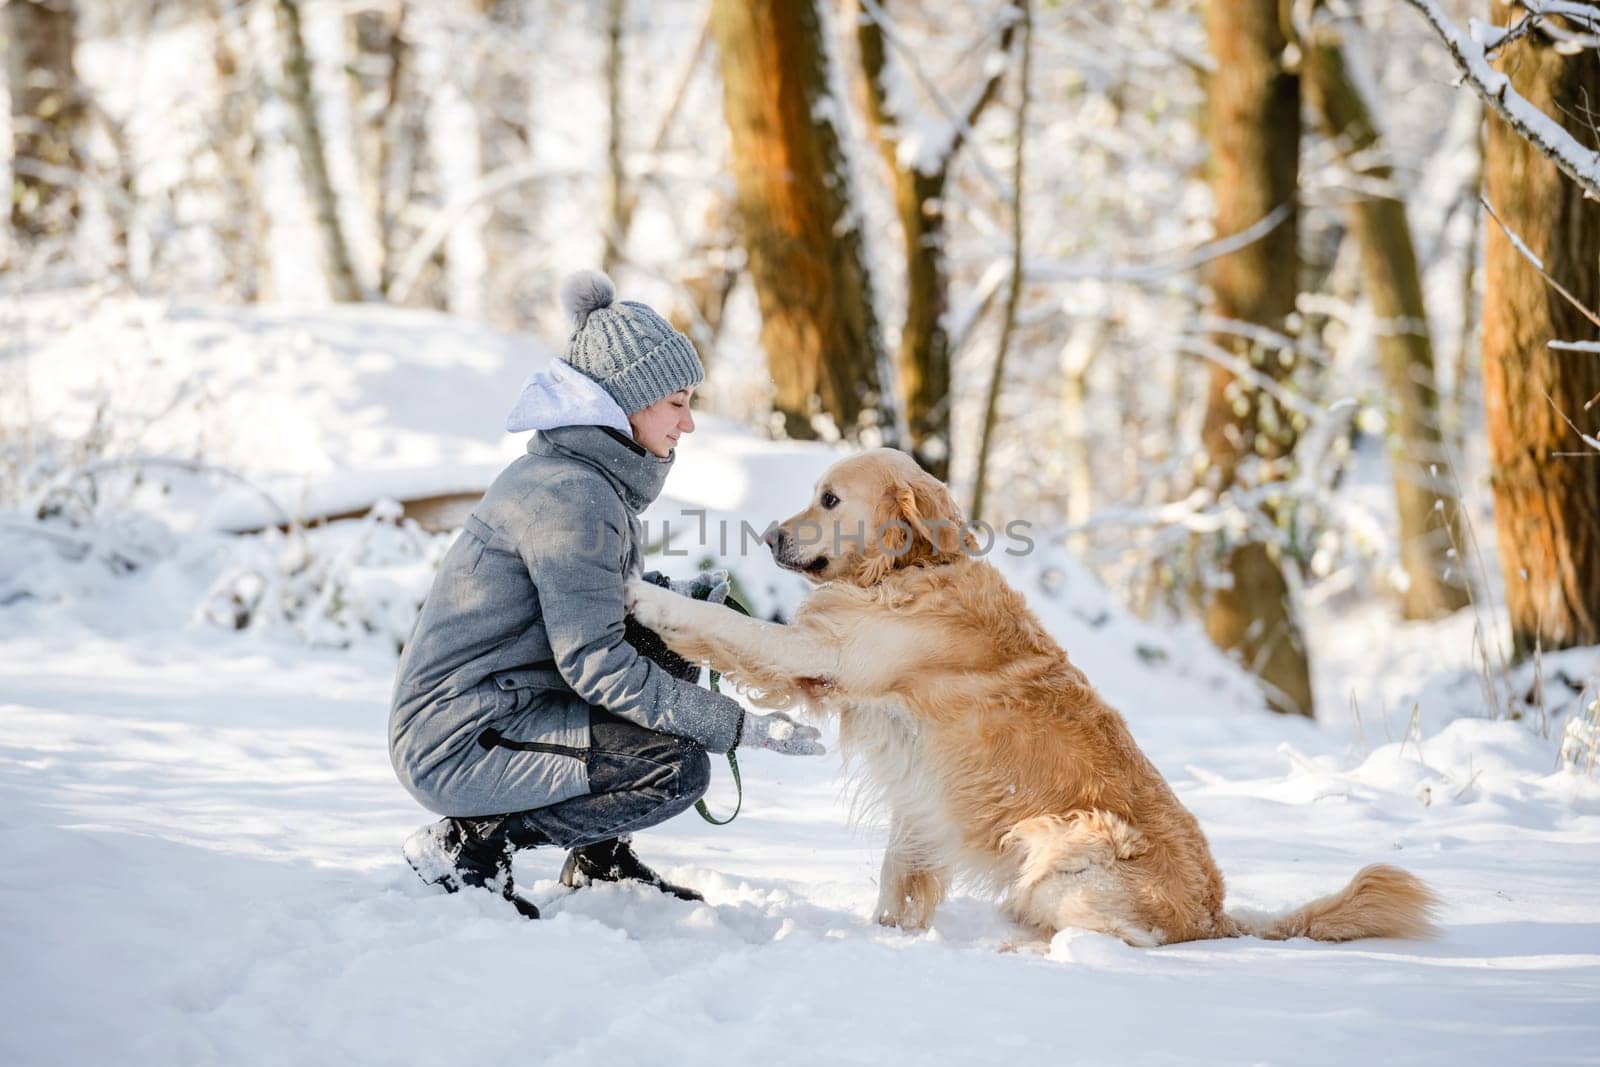 Teenage Girl With Golden Retriever, Dog Giving Paw To Girl In Winter Forest by tan4ikk1